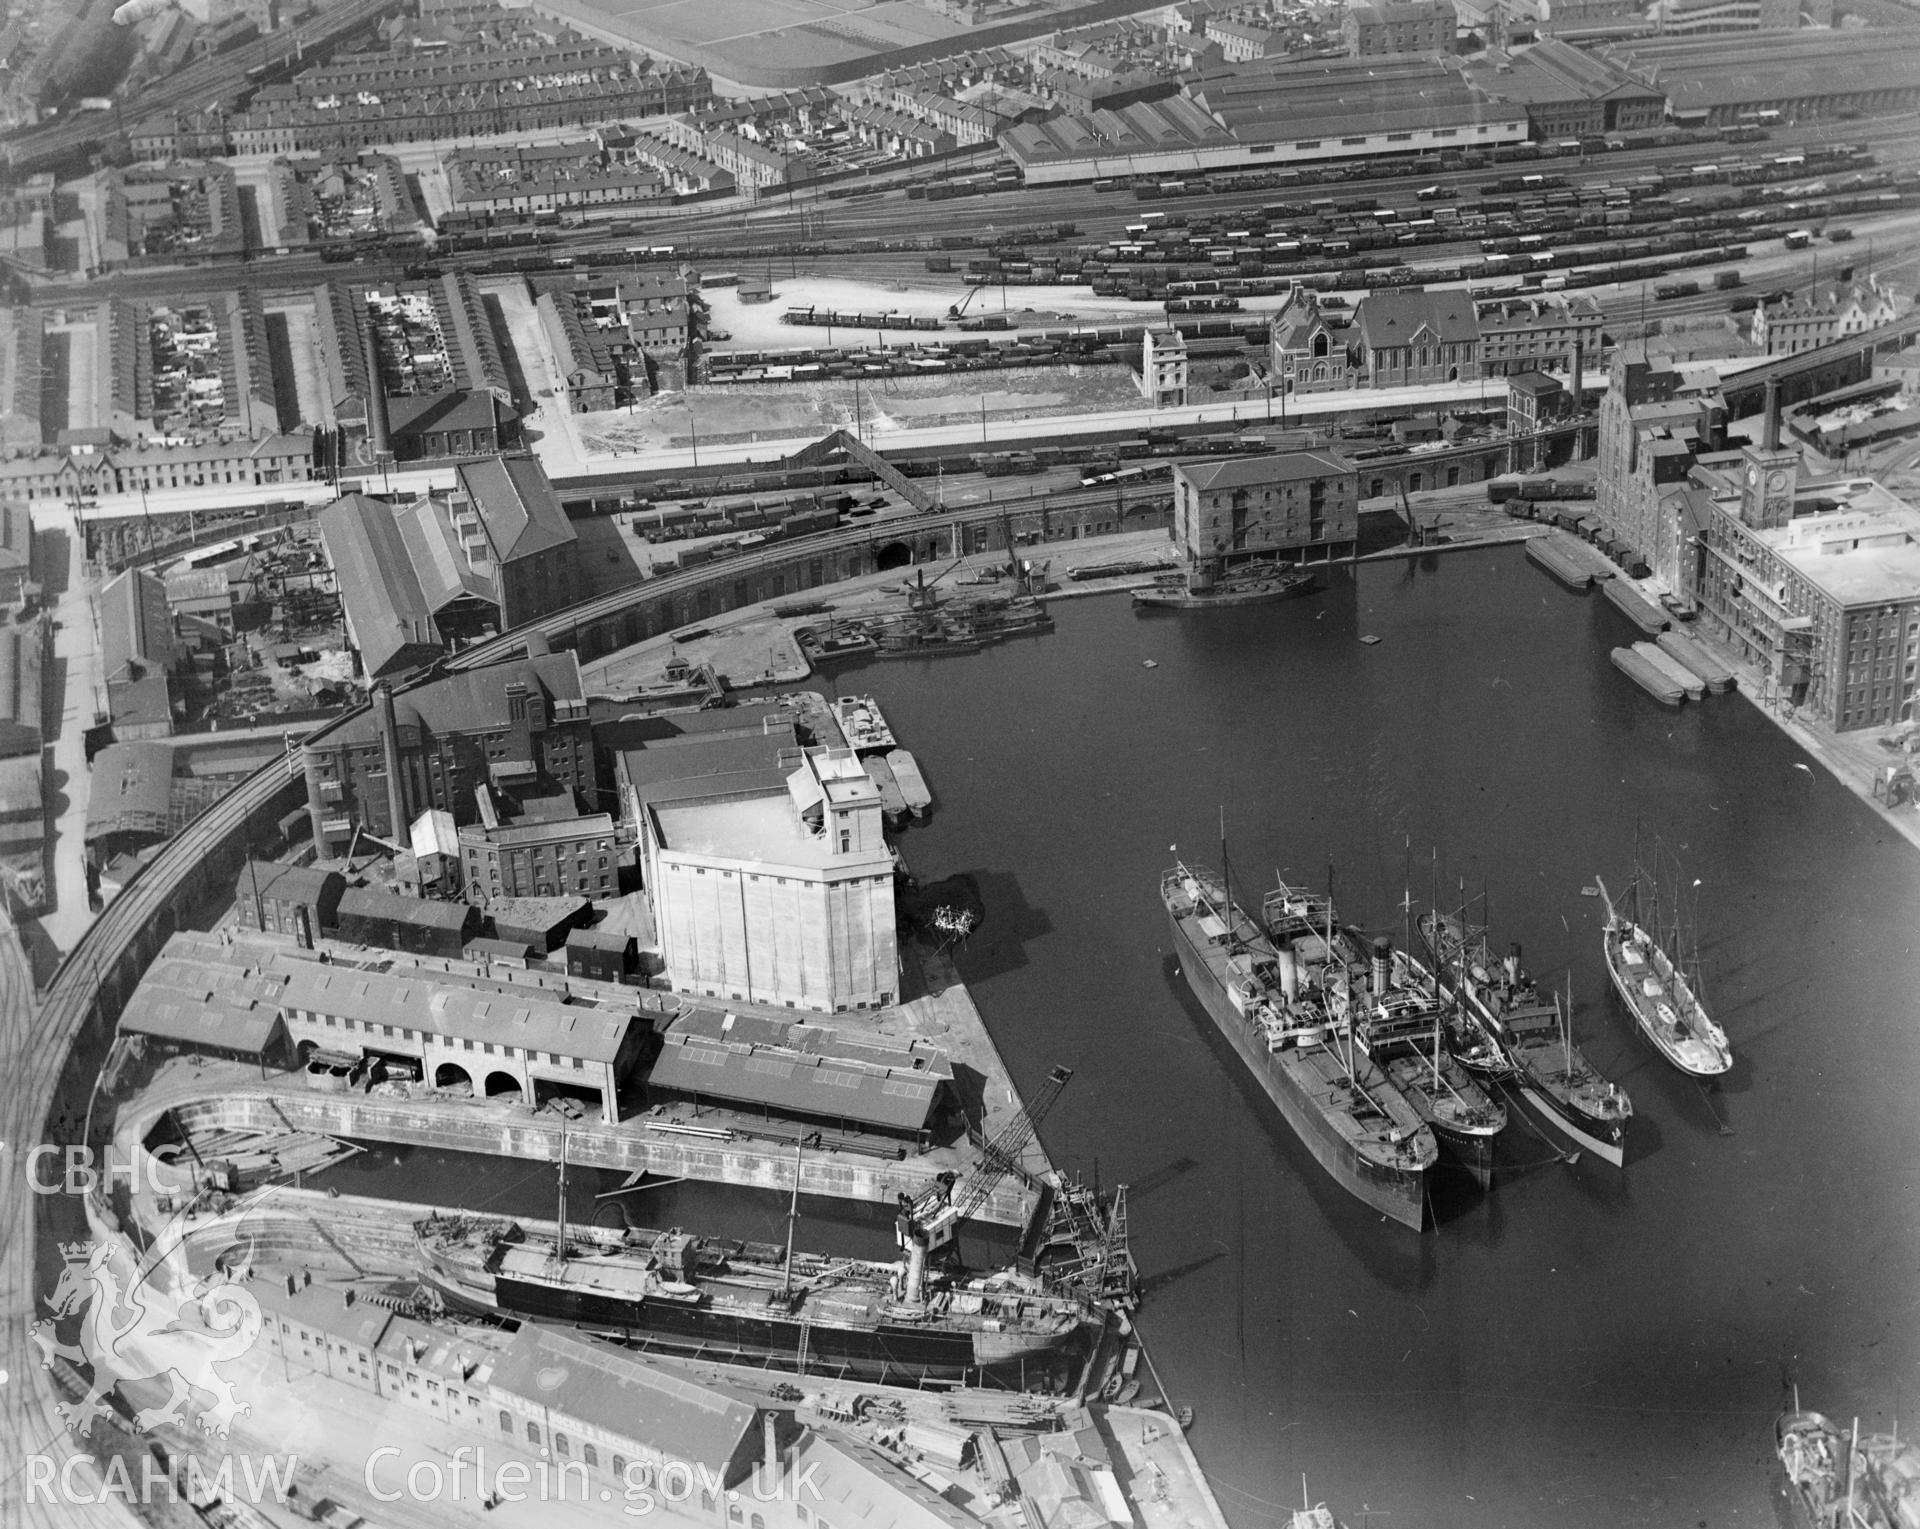 View of Bute East dock, Cardiff and surrounding area, oblique aerial view. 5?x4? black and white glass plate negative.